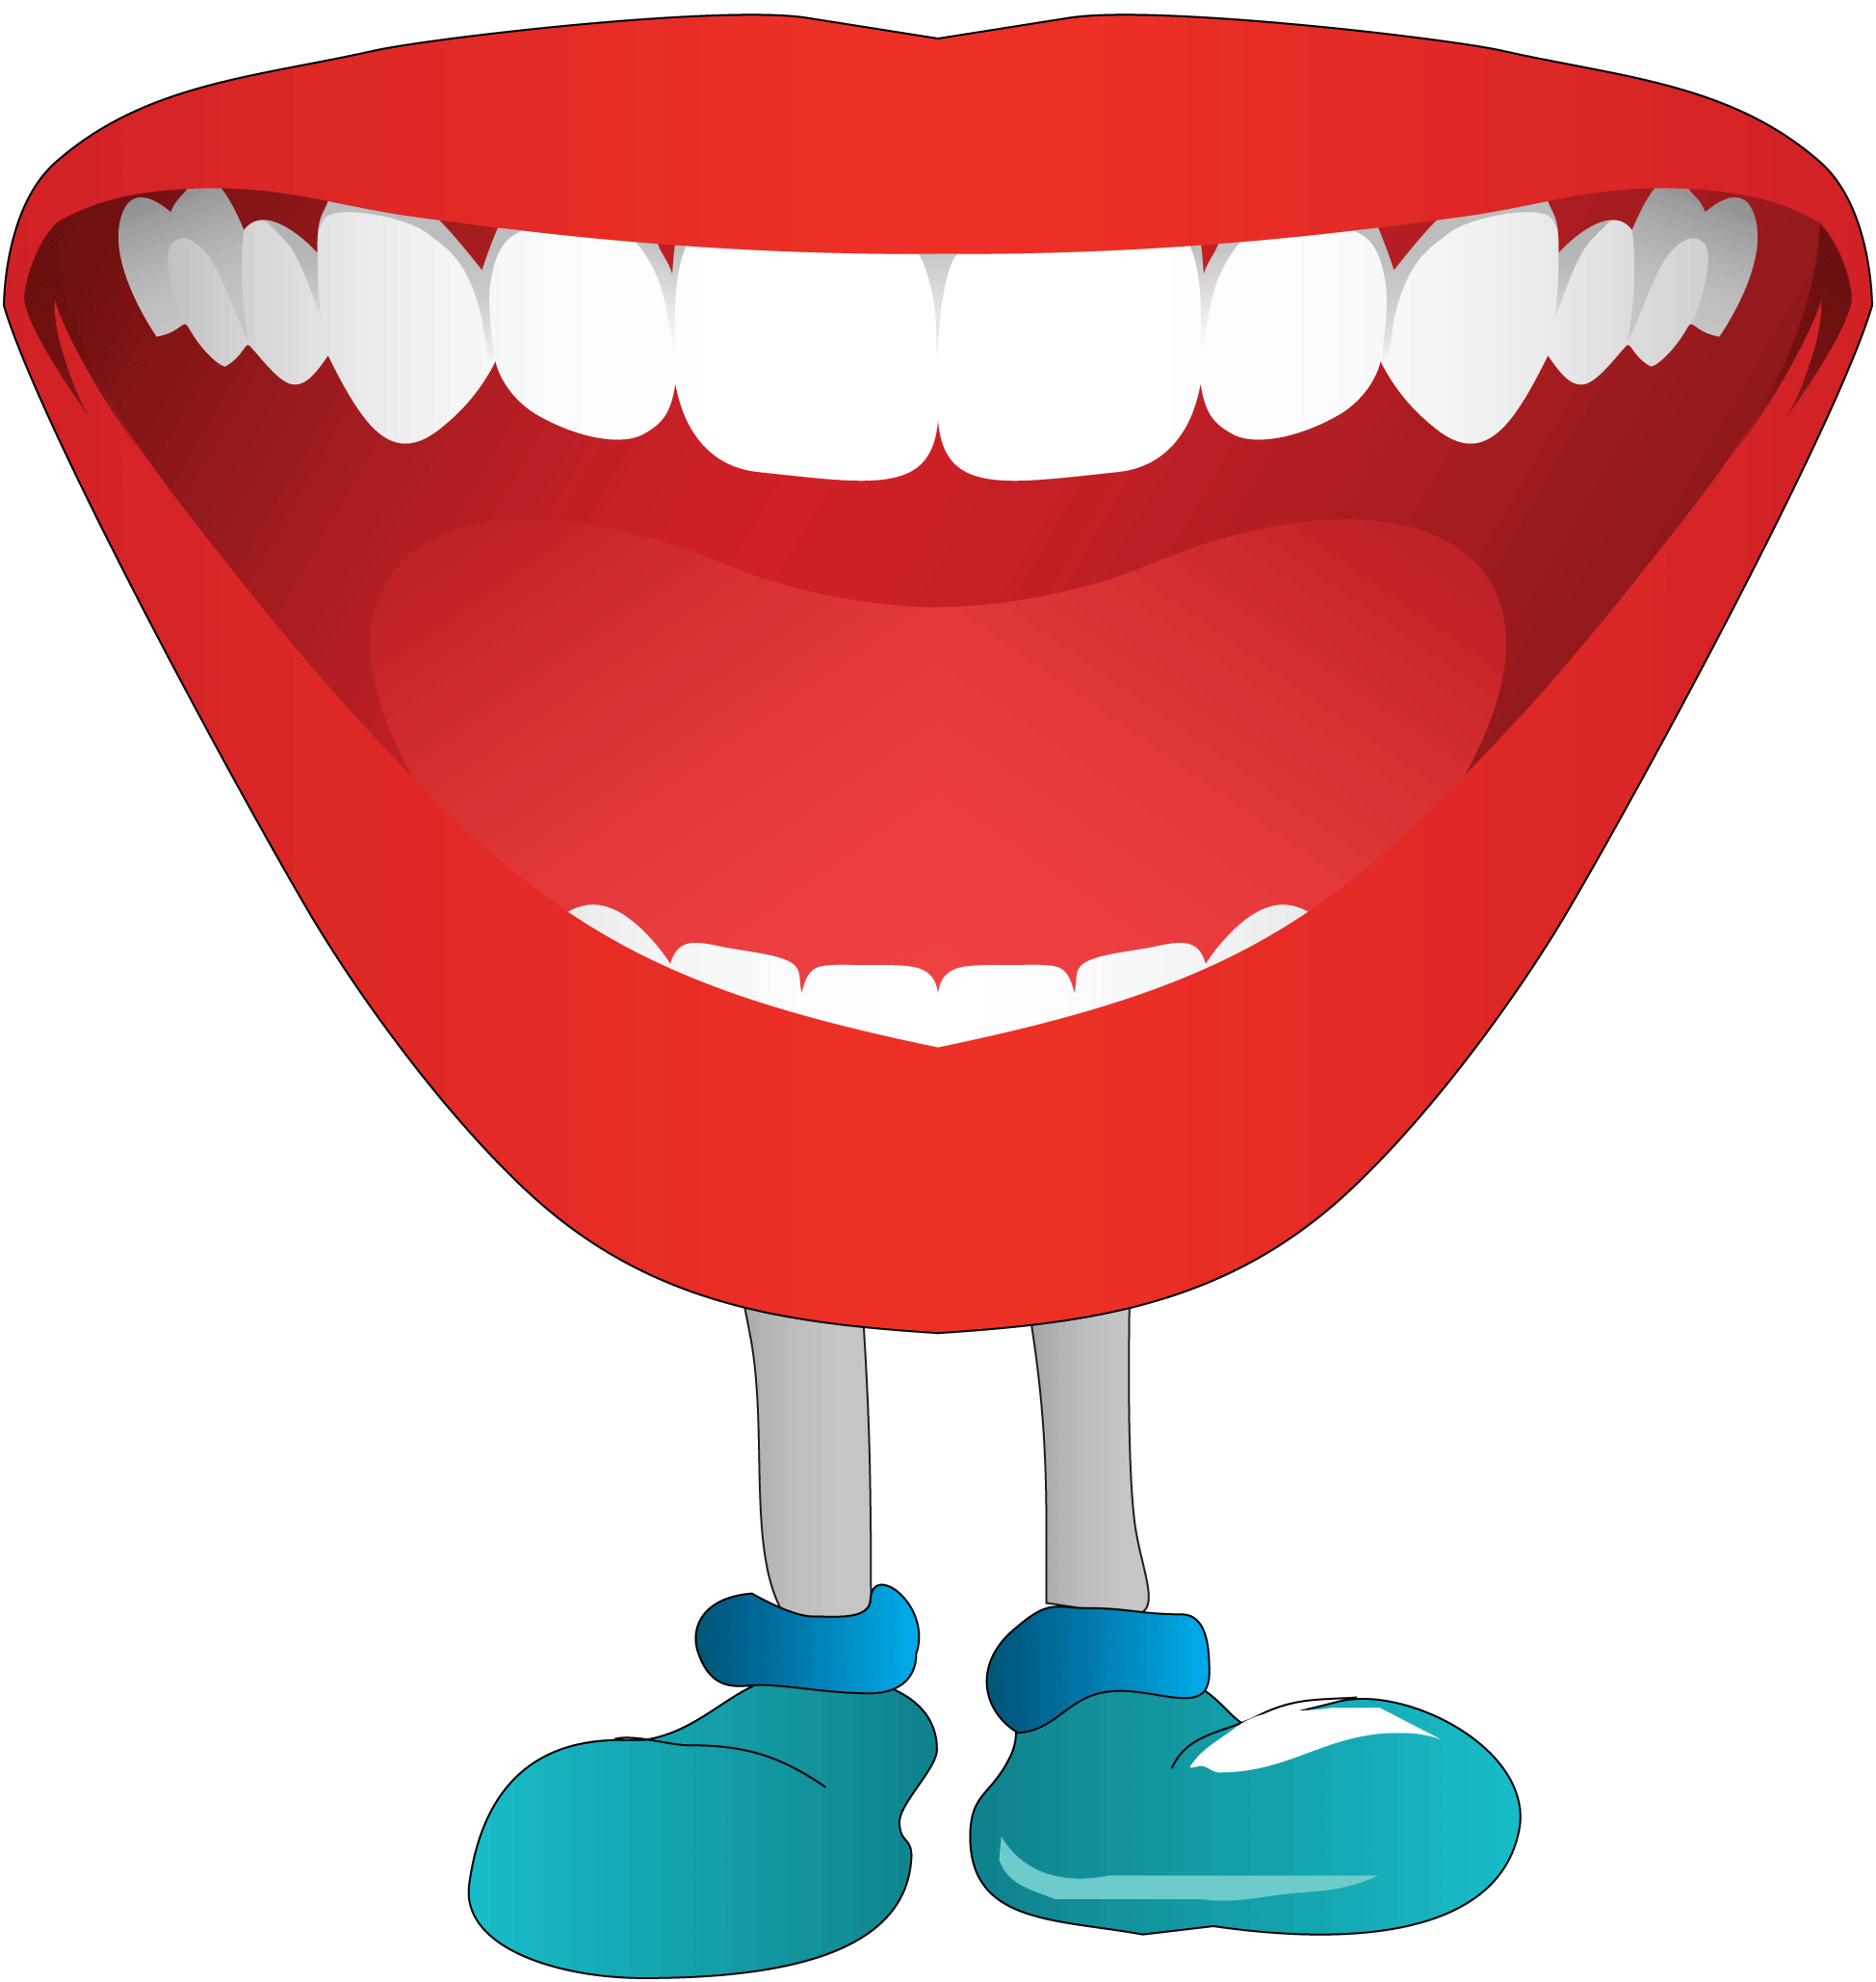 Open Mouth Clipart - Cliparts.co